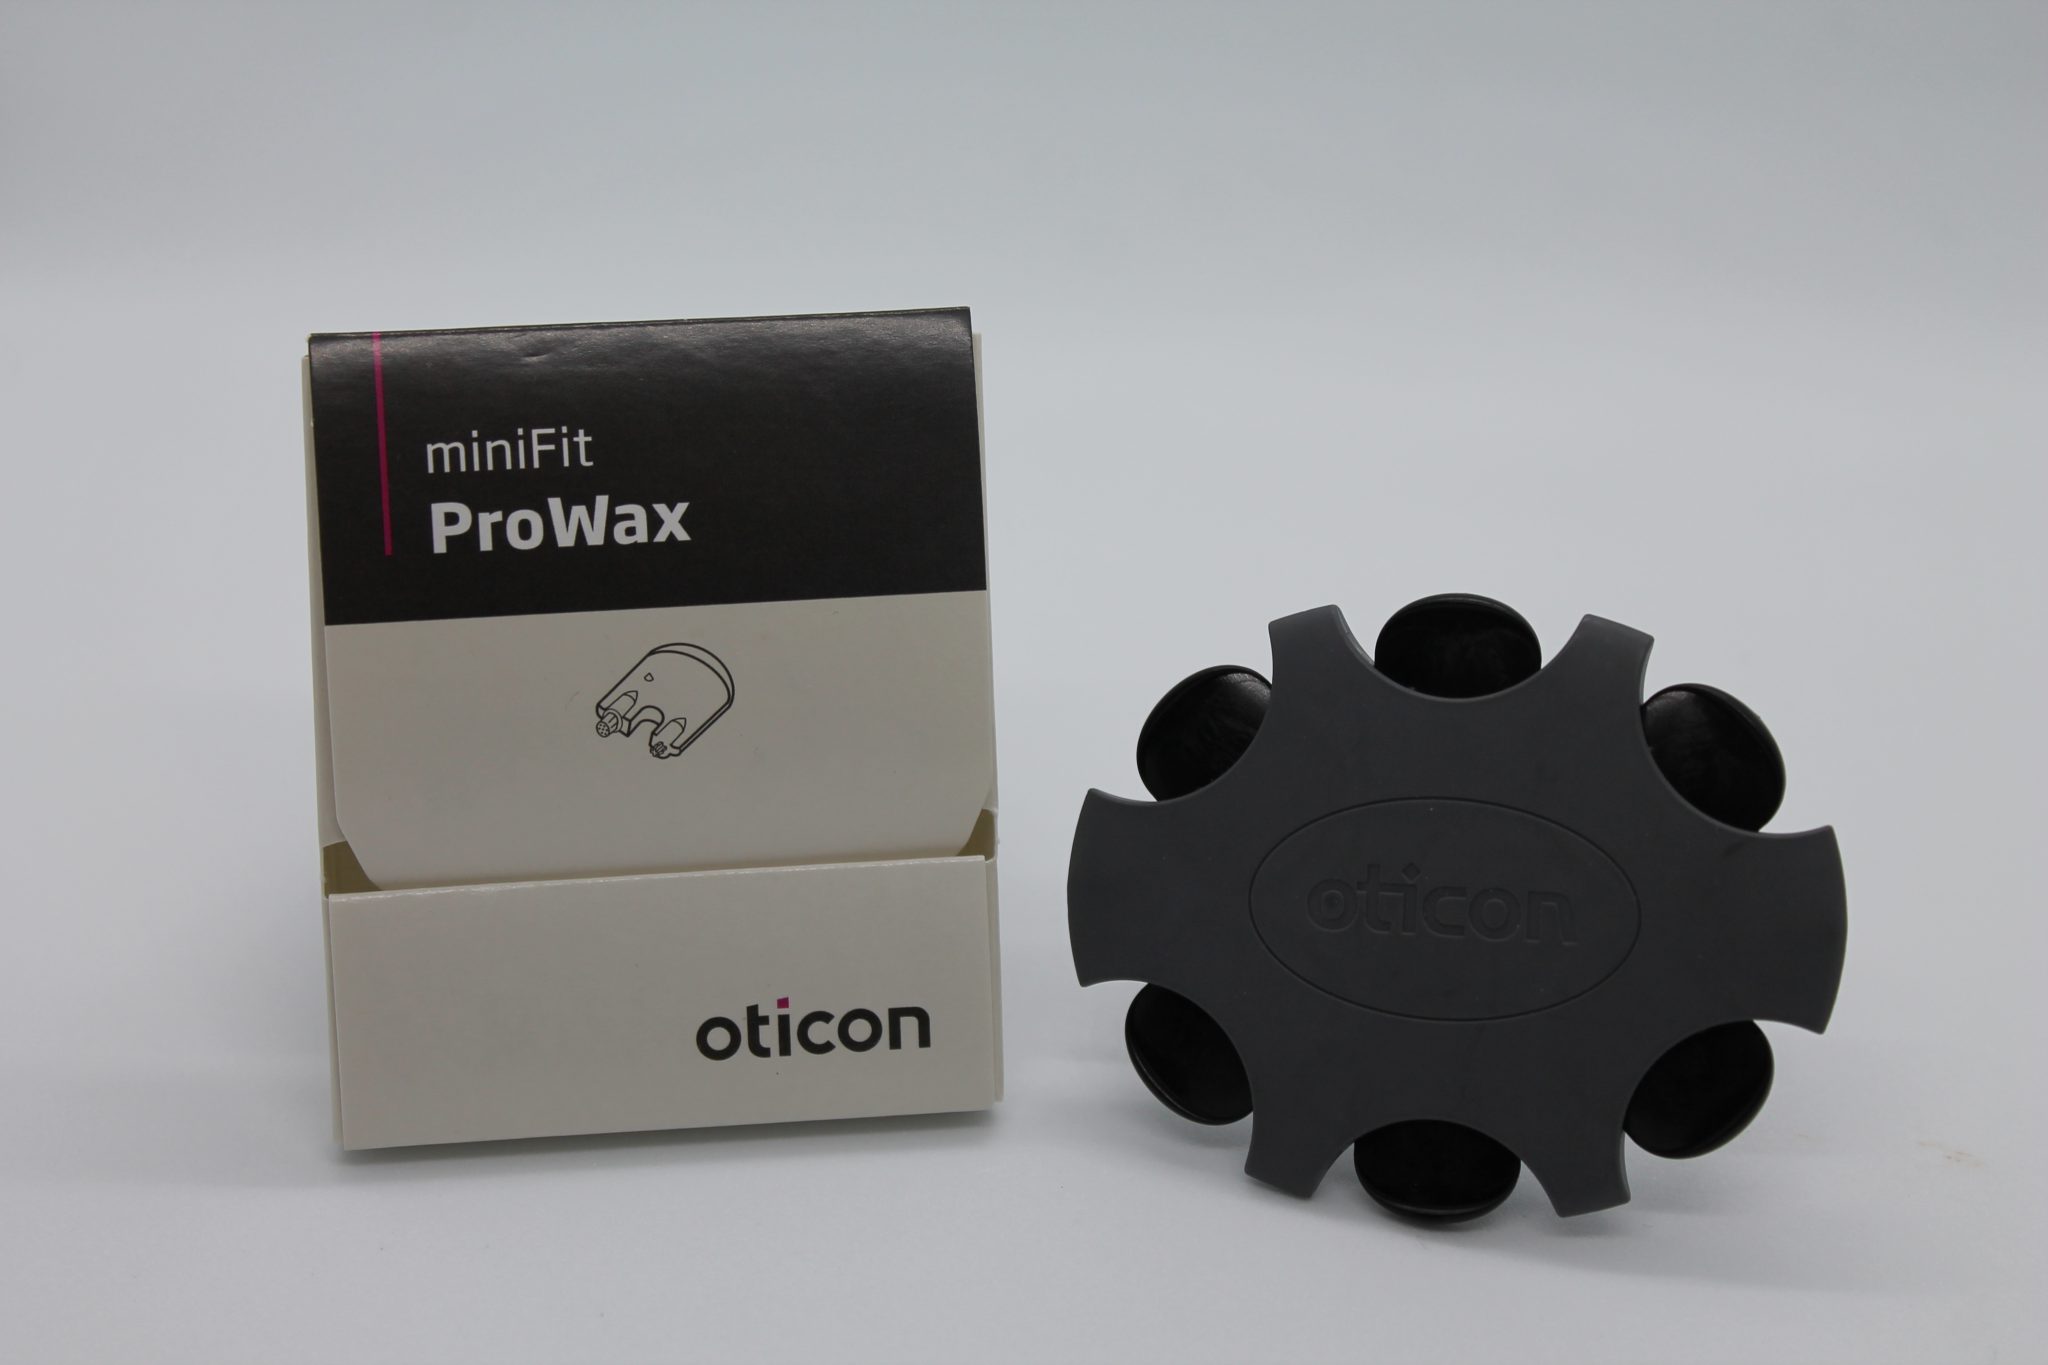 wax filters for photos